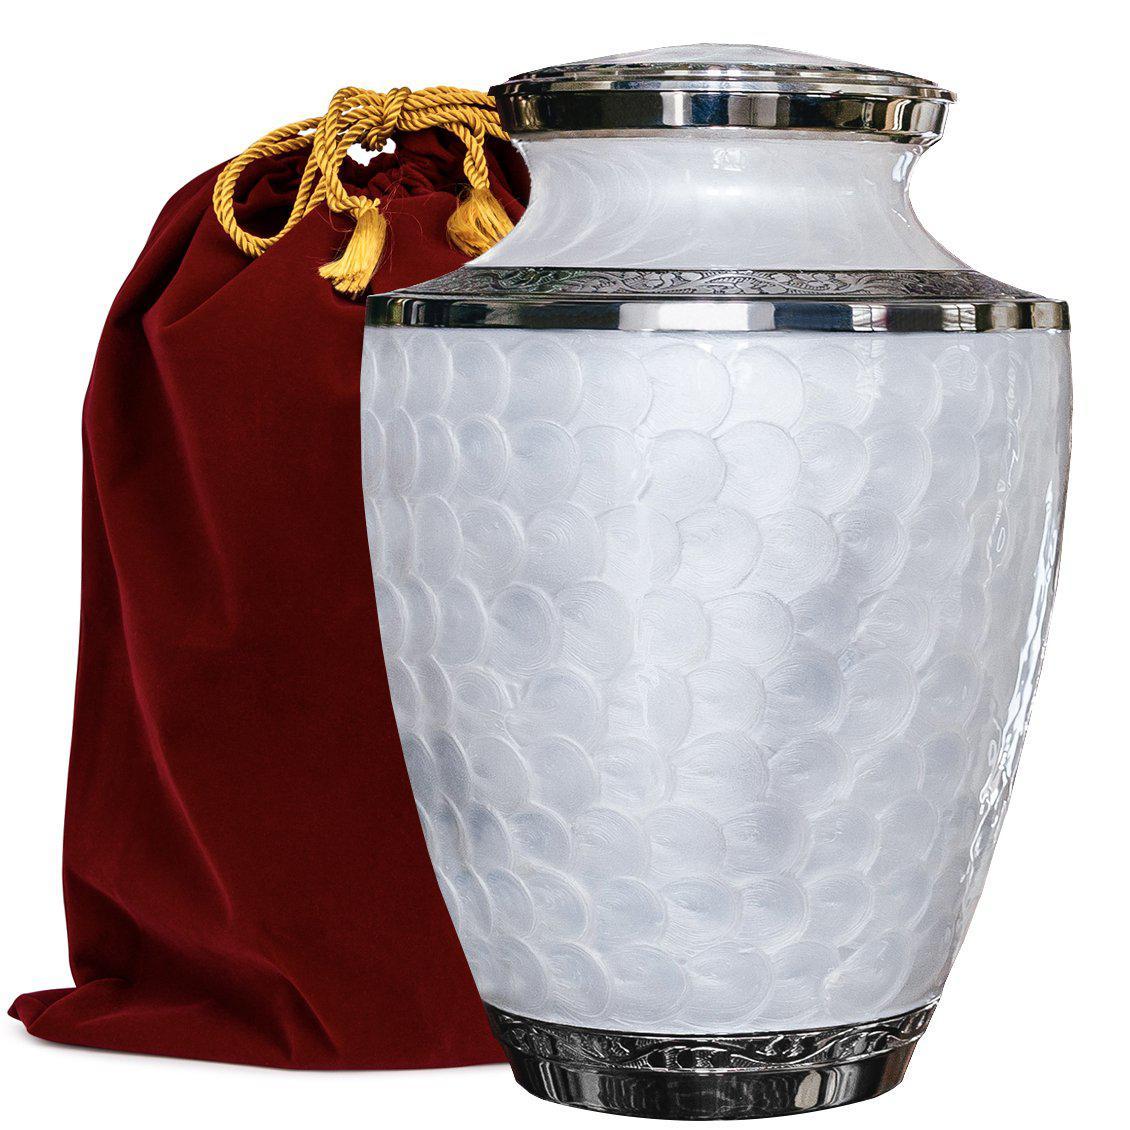 Everlasting Love Beautiful Timeless White Adult Cremation Urn For Human Ashes